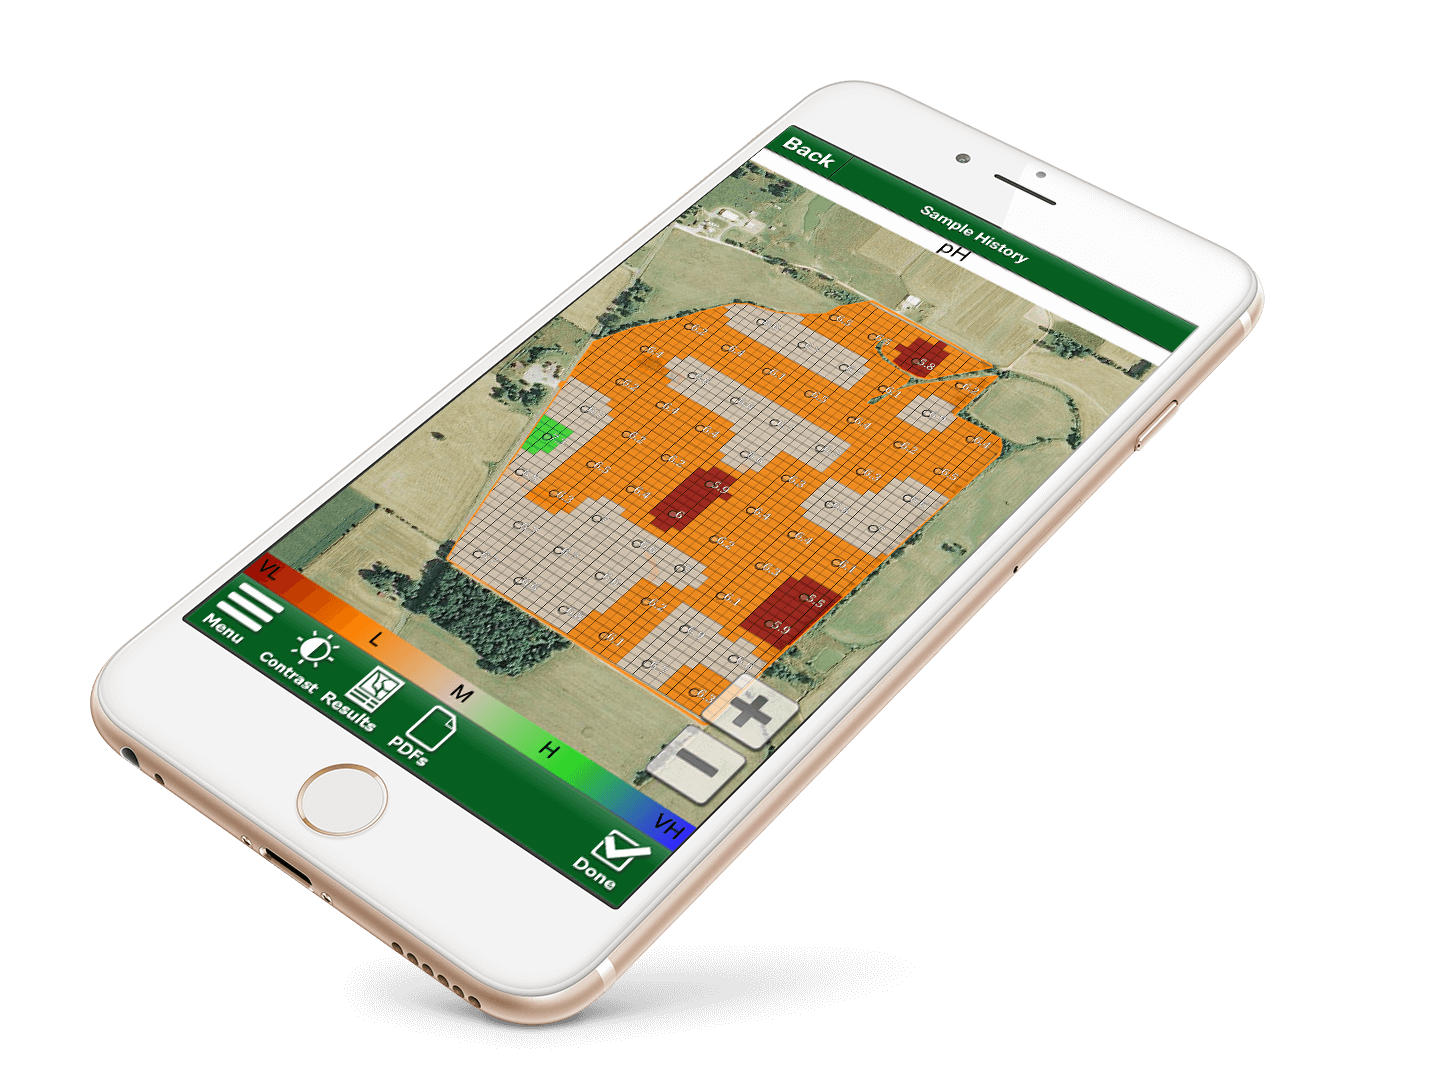 Soil Test Pro lab results now integrated with the John Deere Operations center - displayed on mobile